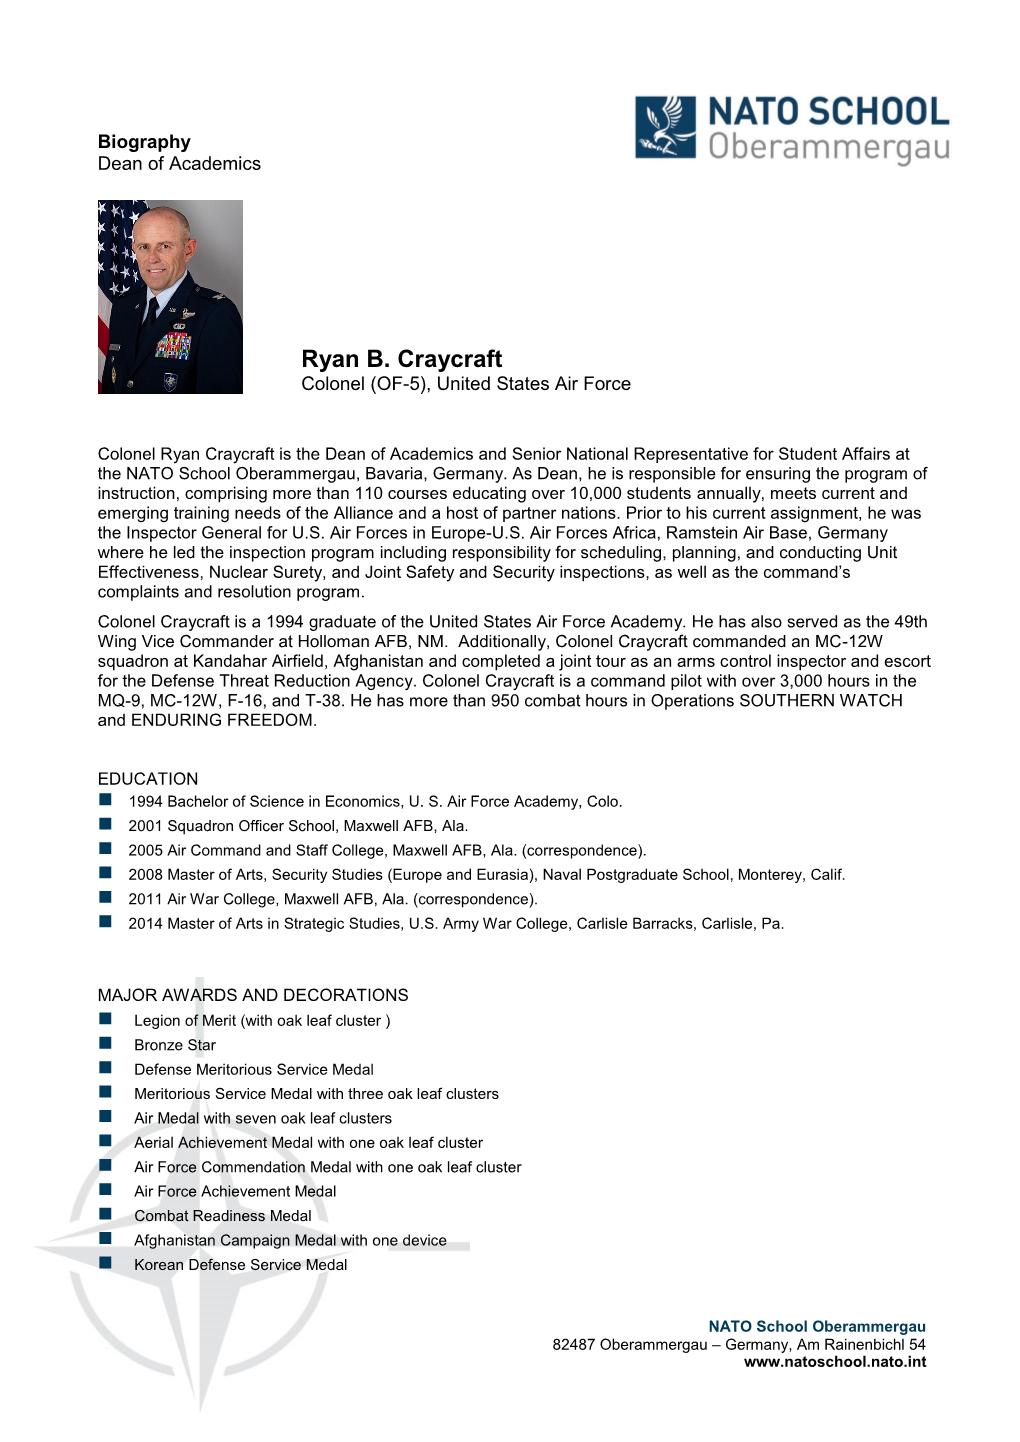 Ryan B. Craycraft Colonel (OF-5), United States Air Force